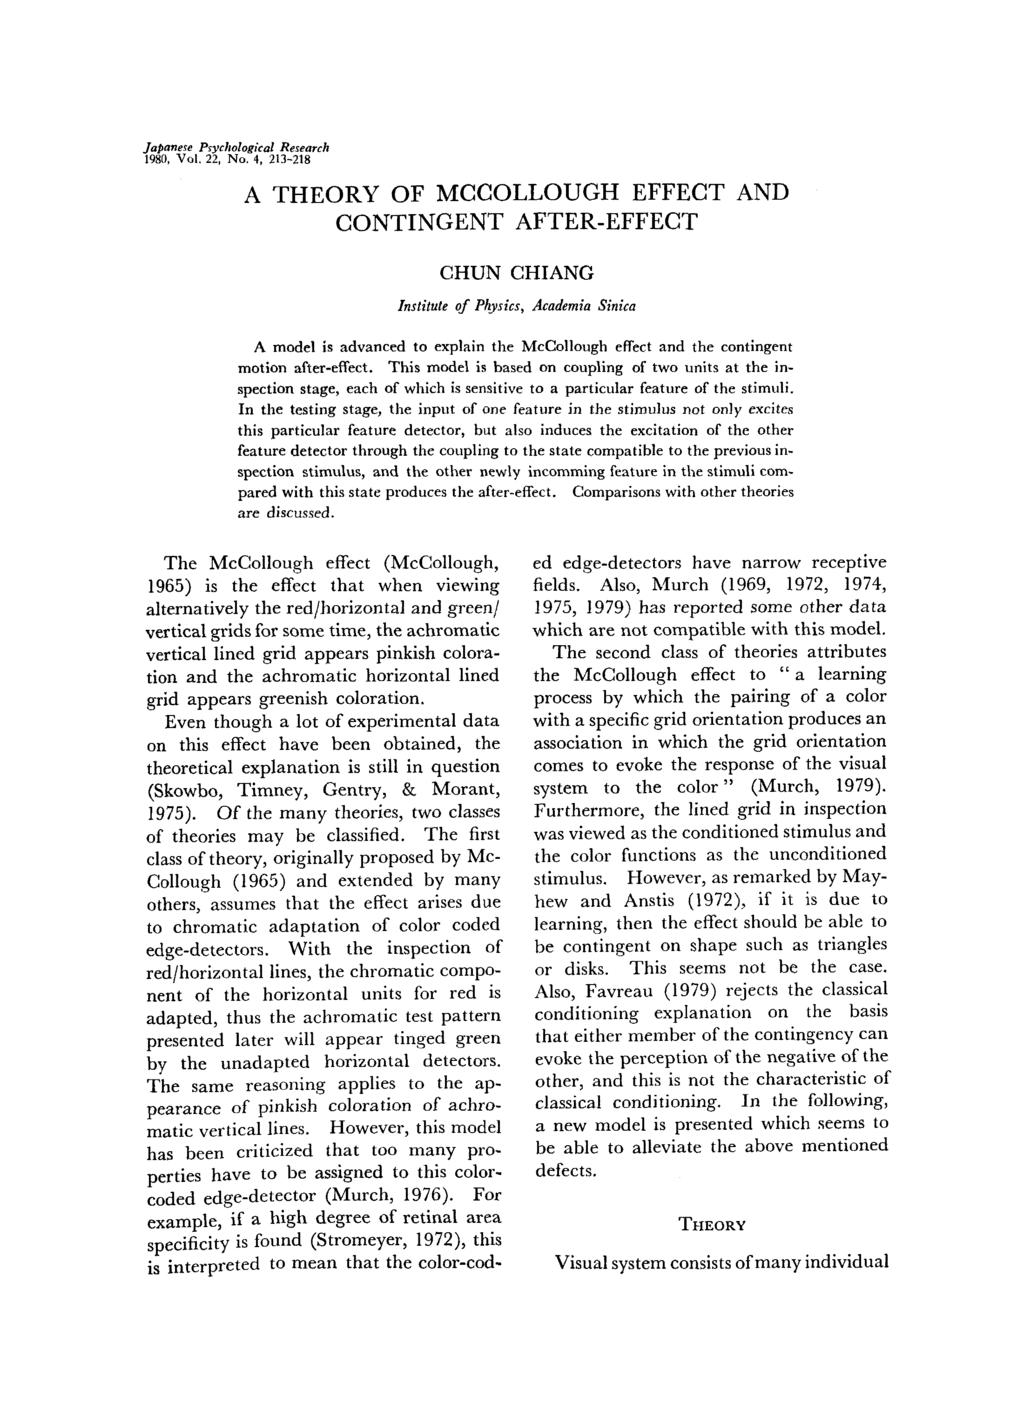 A THEORY OF MCCOLLOUGH EFFECT AND CONTINGENT AFTER-EFFECT CHUN CHIANG Institute of Physics, Academia Sinica A model is advanced to explain the McCollough effect and the contingent motion after-effect.